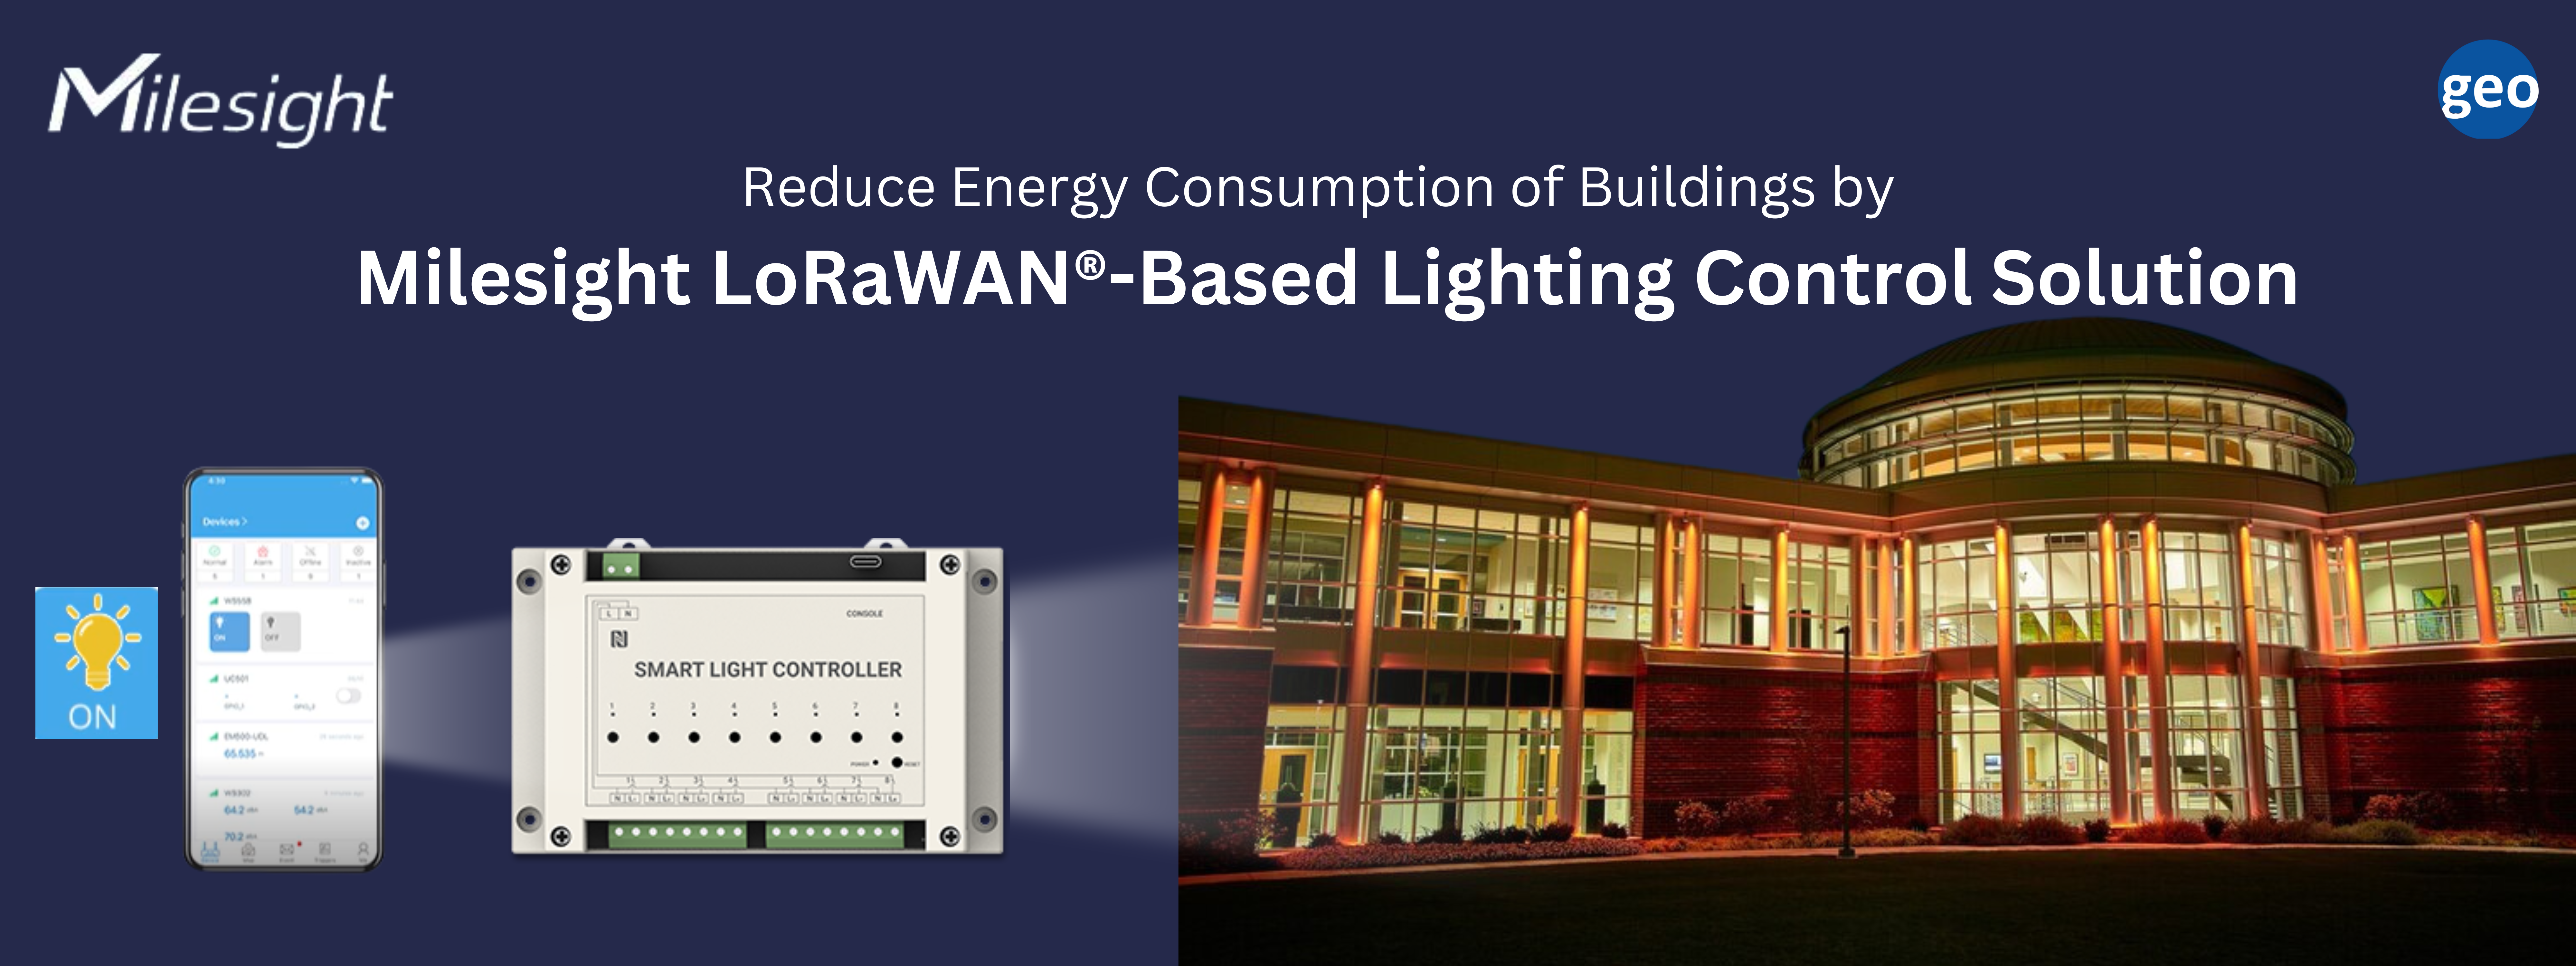 Milesight: LoRaWAN®-Based for Reducing the Energy Consumption of Buildings